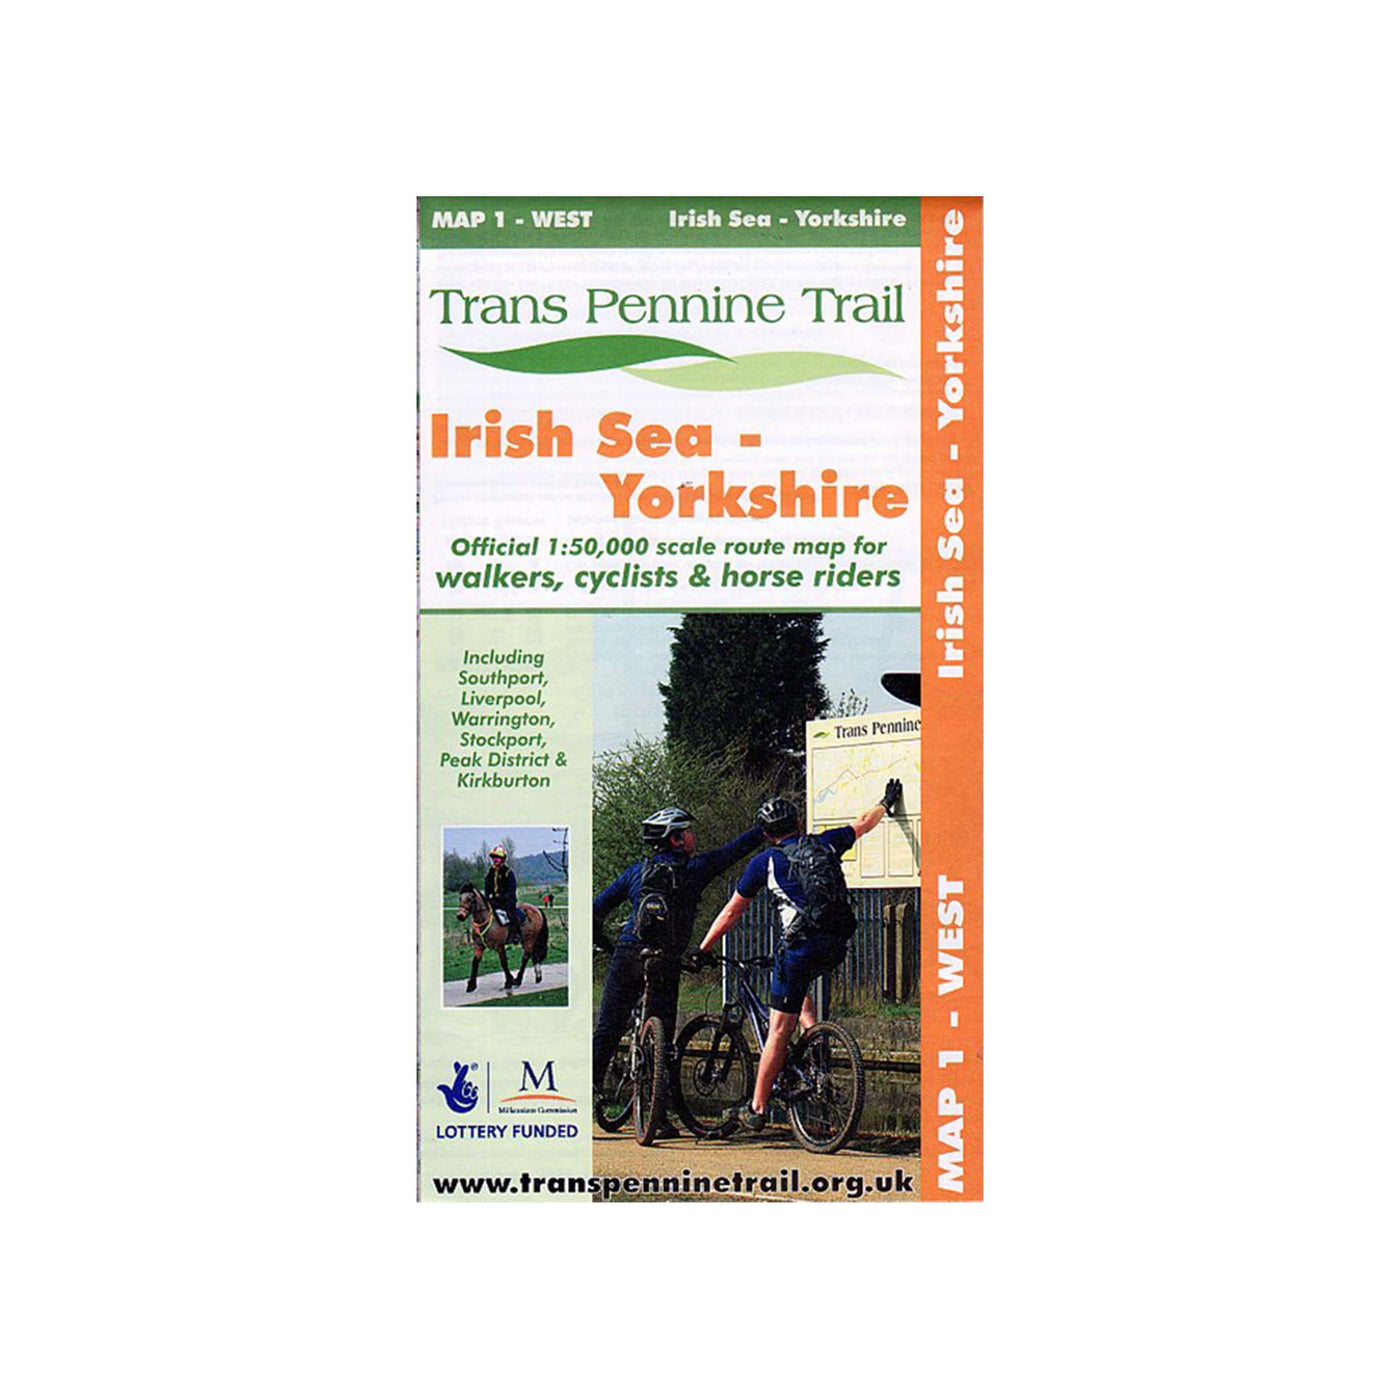 Trans Pennine Trail map 1: West - Irish Sea to Yorkshire. Official cycle map of Trans Pennine Trail West for walkers, cyclists and horse riders. 